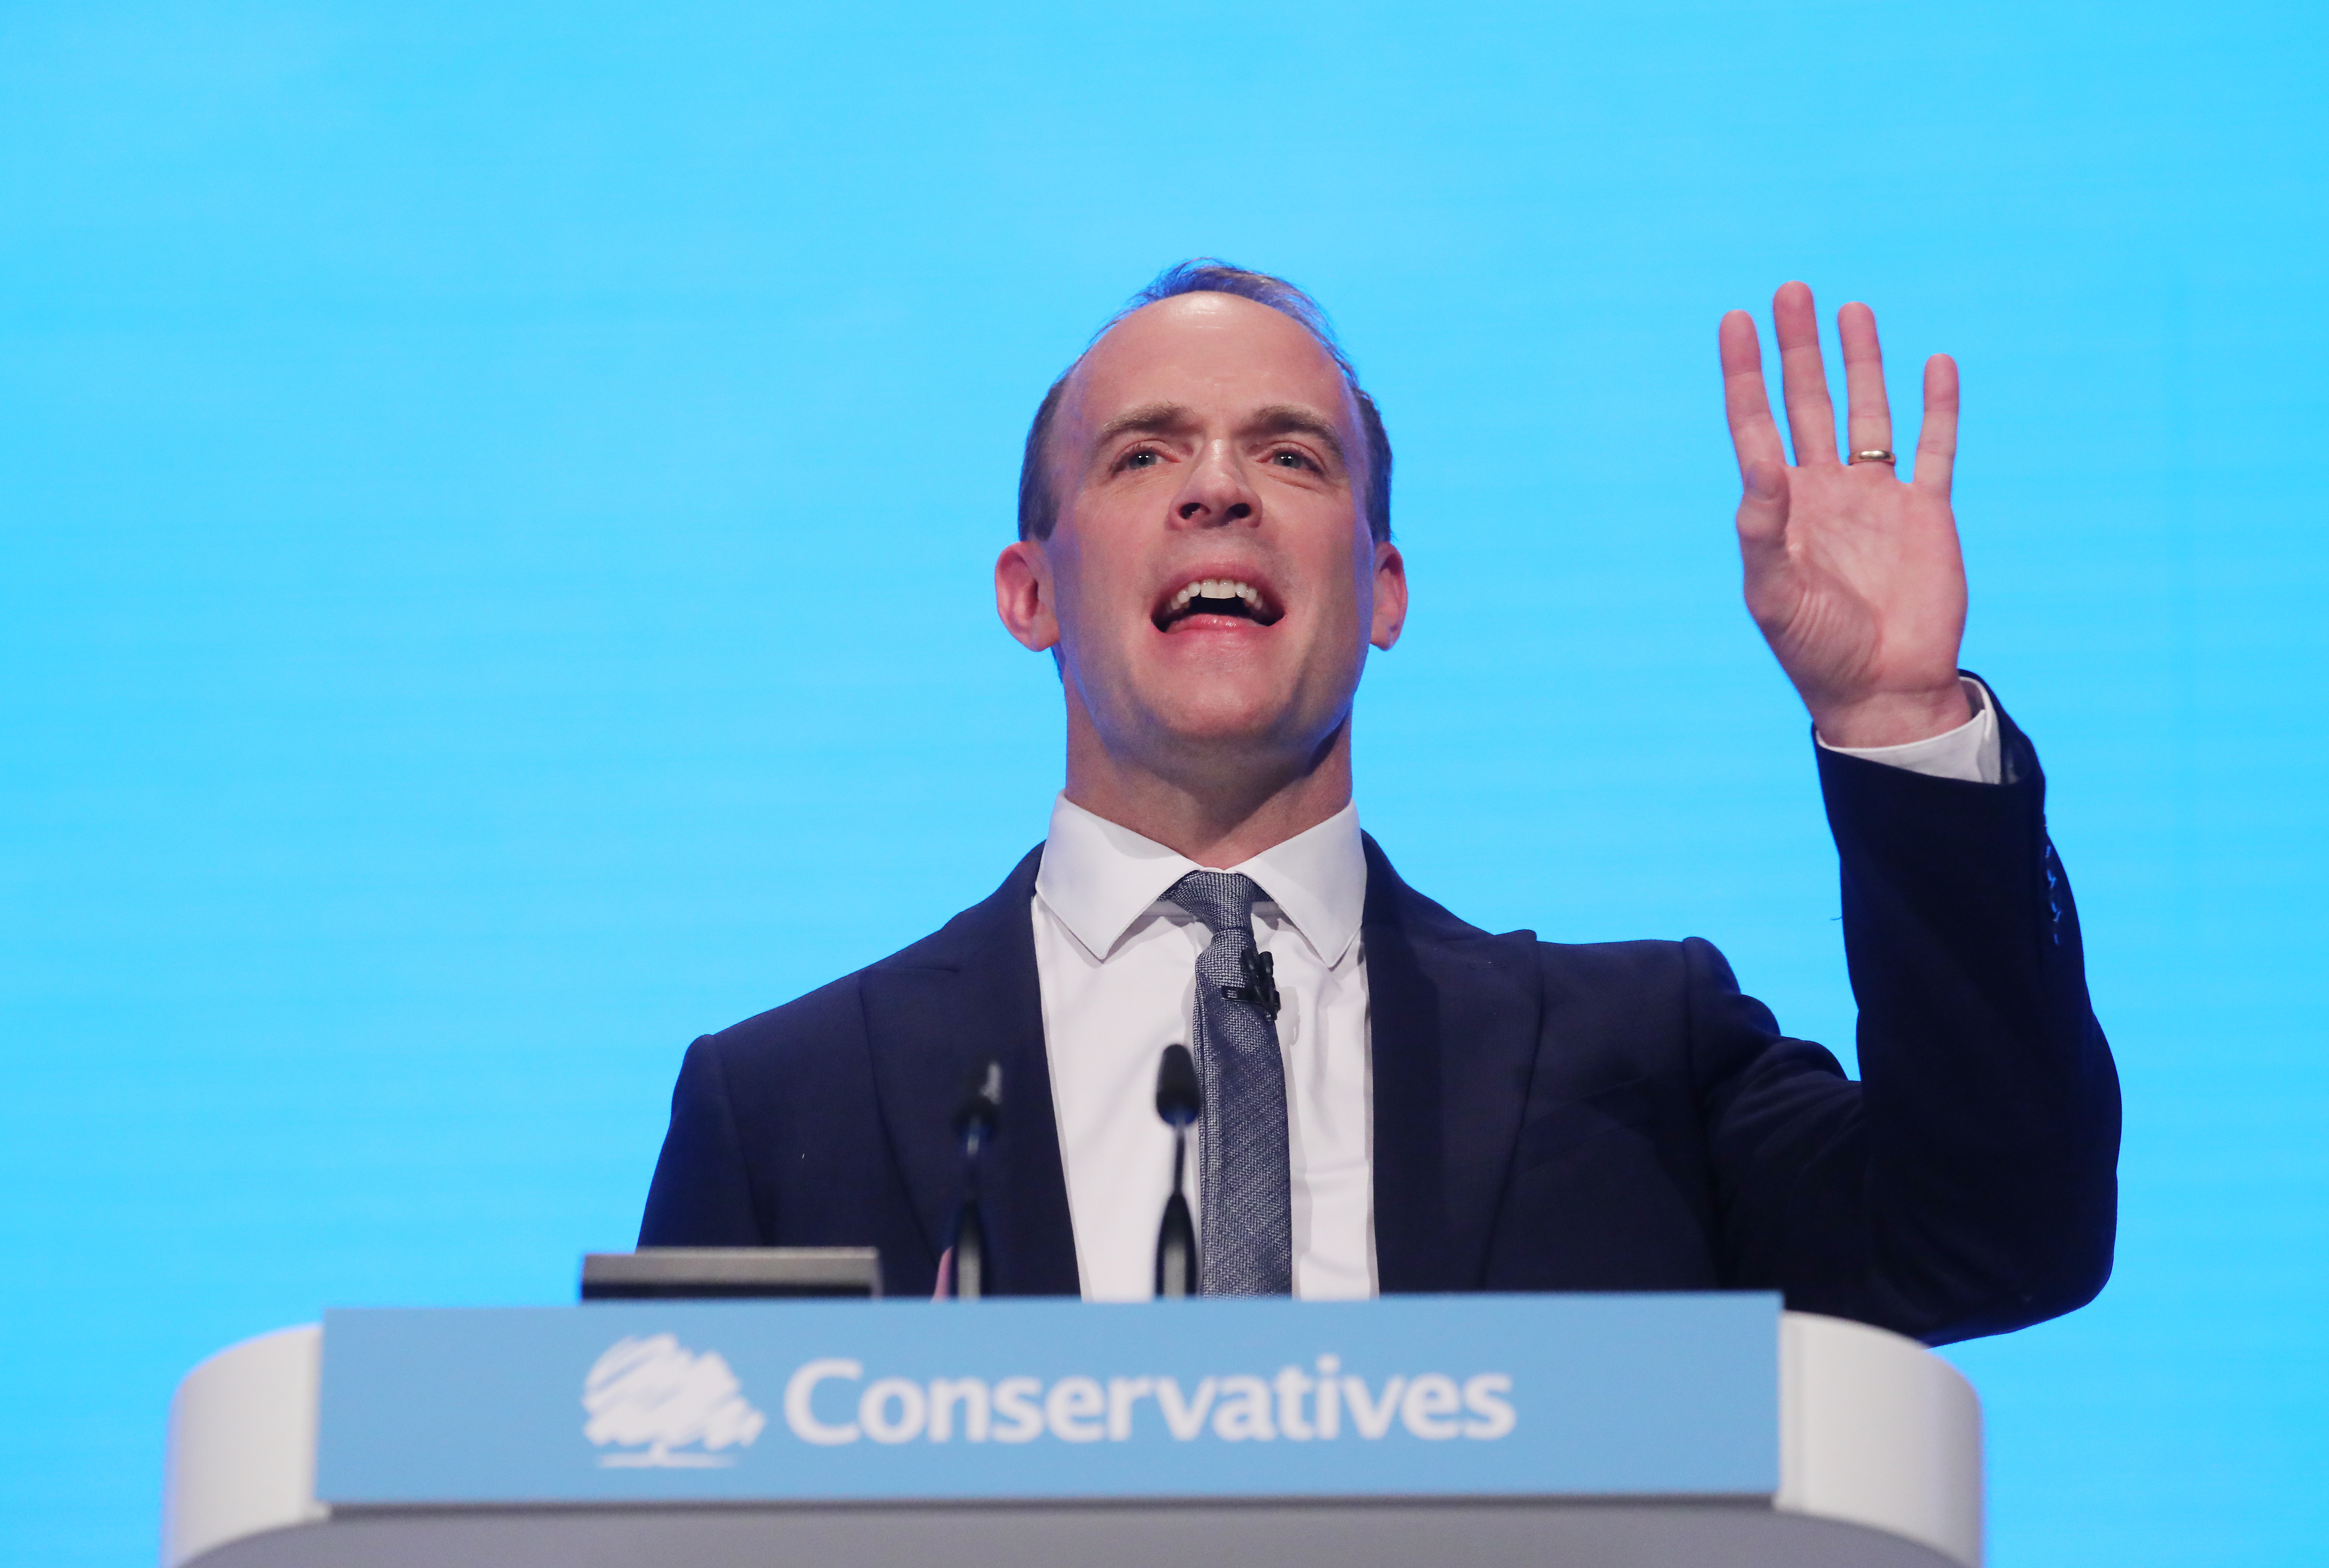 Foreign Secretary Dominic Raab delivers a speech during the "Delivering Brexit" session on day one of the Conservative Party Conference being held at the Manchester Convention Centre